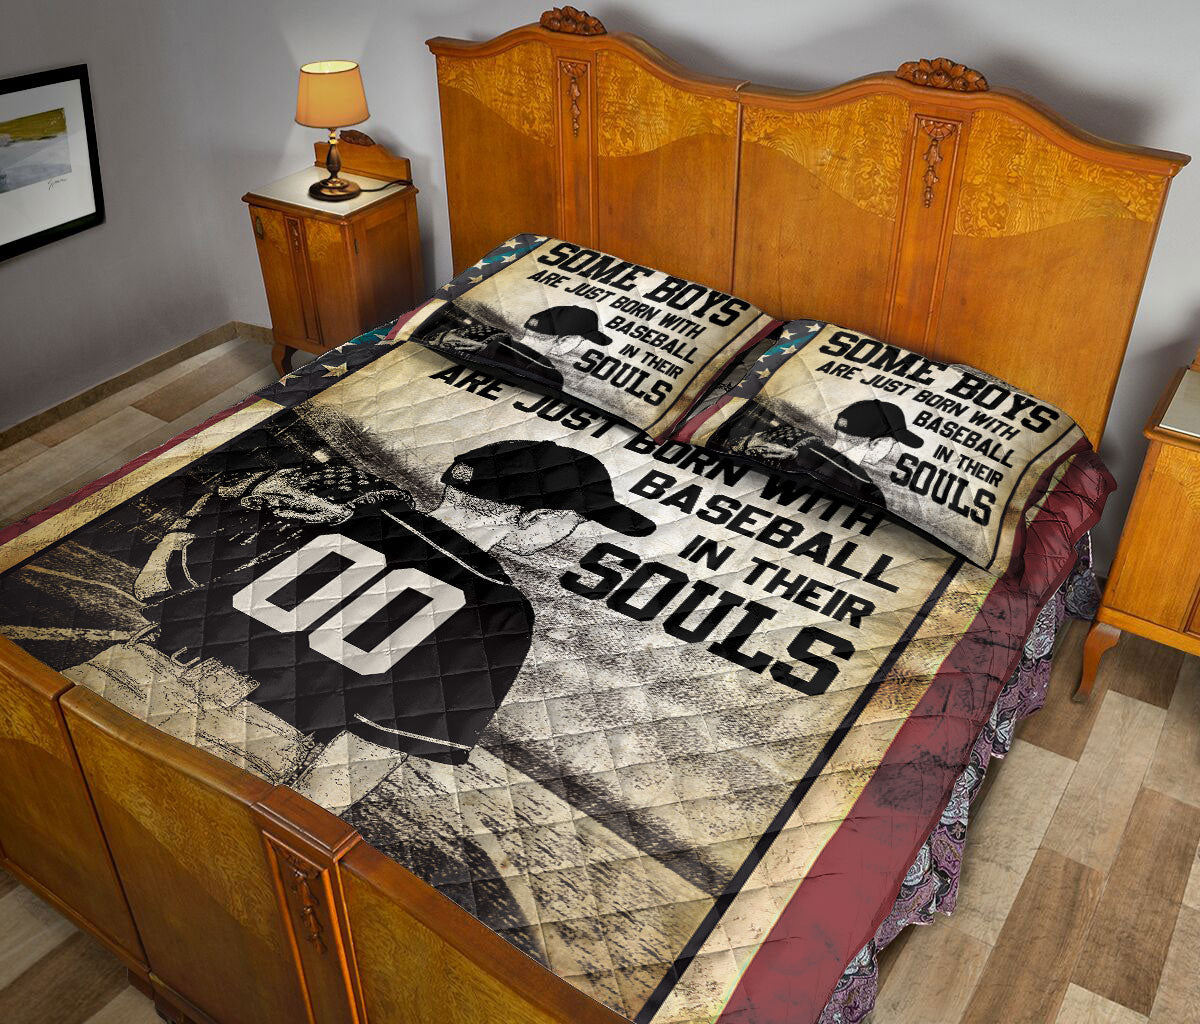 Ohaprints-Quilt-Bed-Set-Pillowcase-Baseball-In-Their-Souls-Catcher-Sports-Gift-Custom-Personalized-Name-Number-Blanket-Bedspread-Bedding-153-Queen (80'' x 90'')